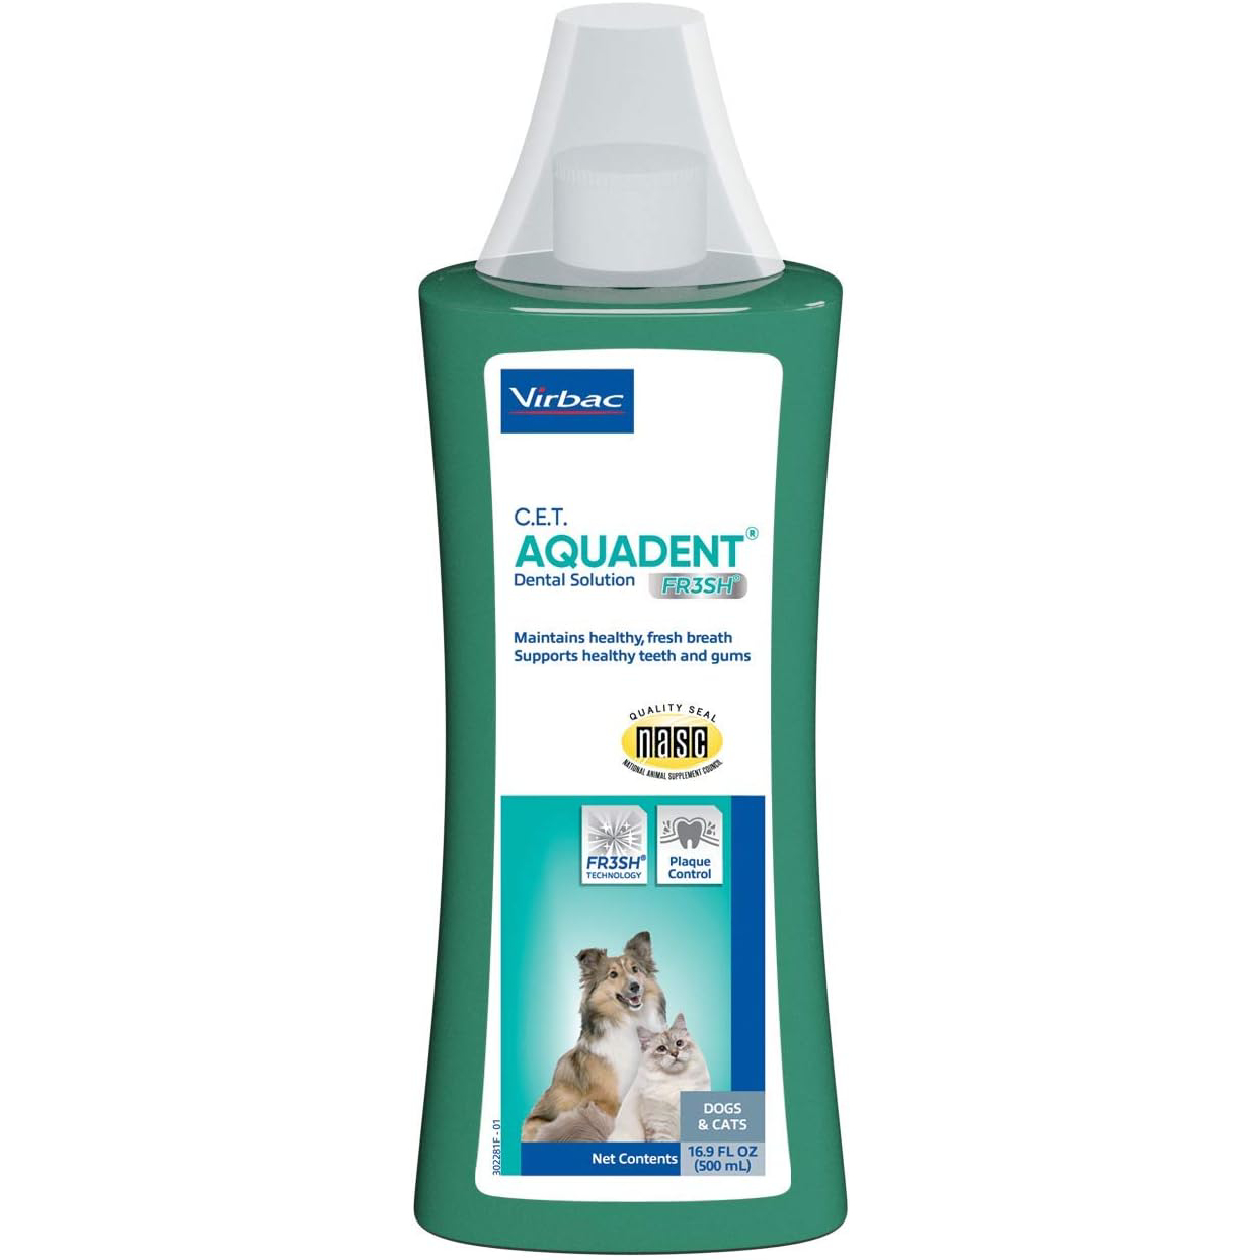 New Project Virbac C.E.T Aquadent Dental Solution for Dogs and Cats 